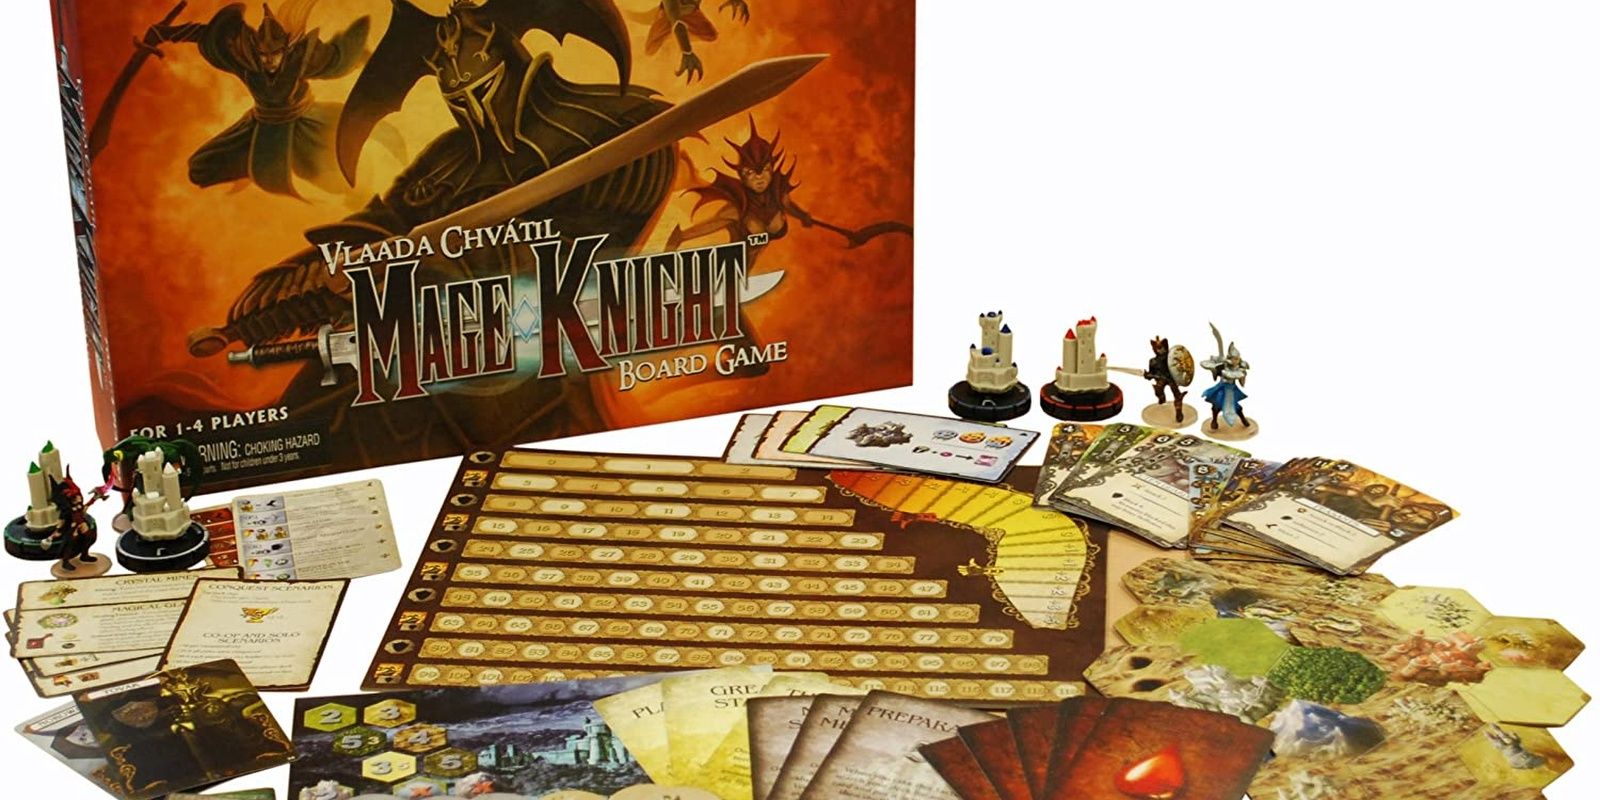 The box and components for Mage Knight board game